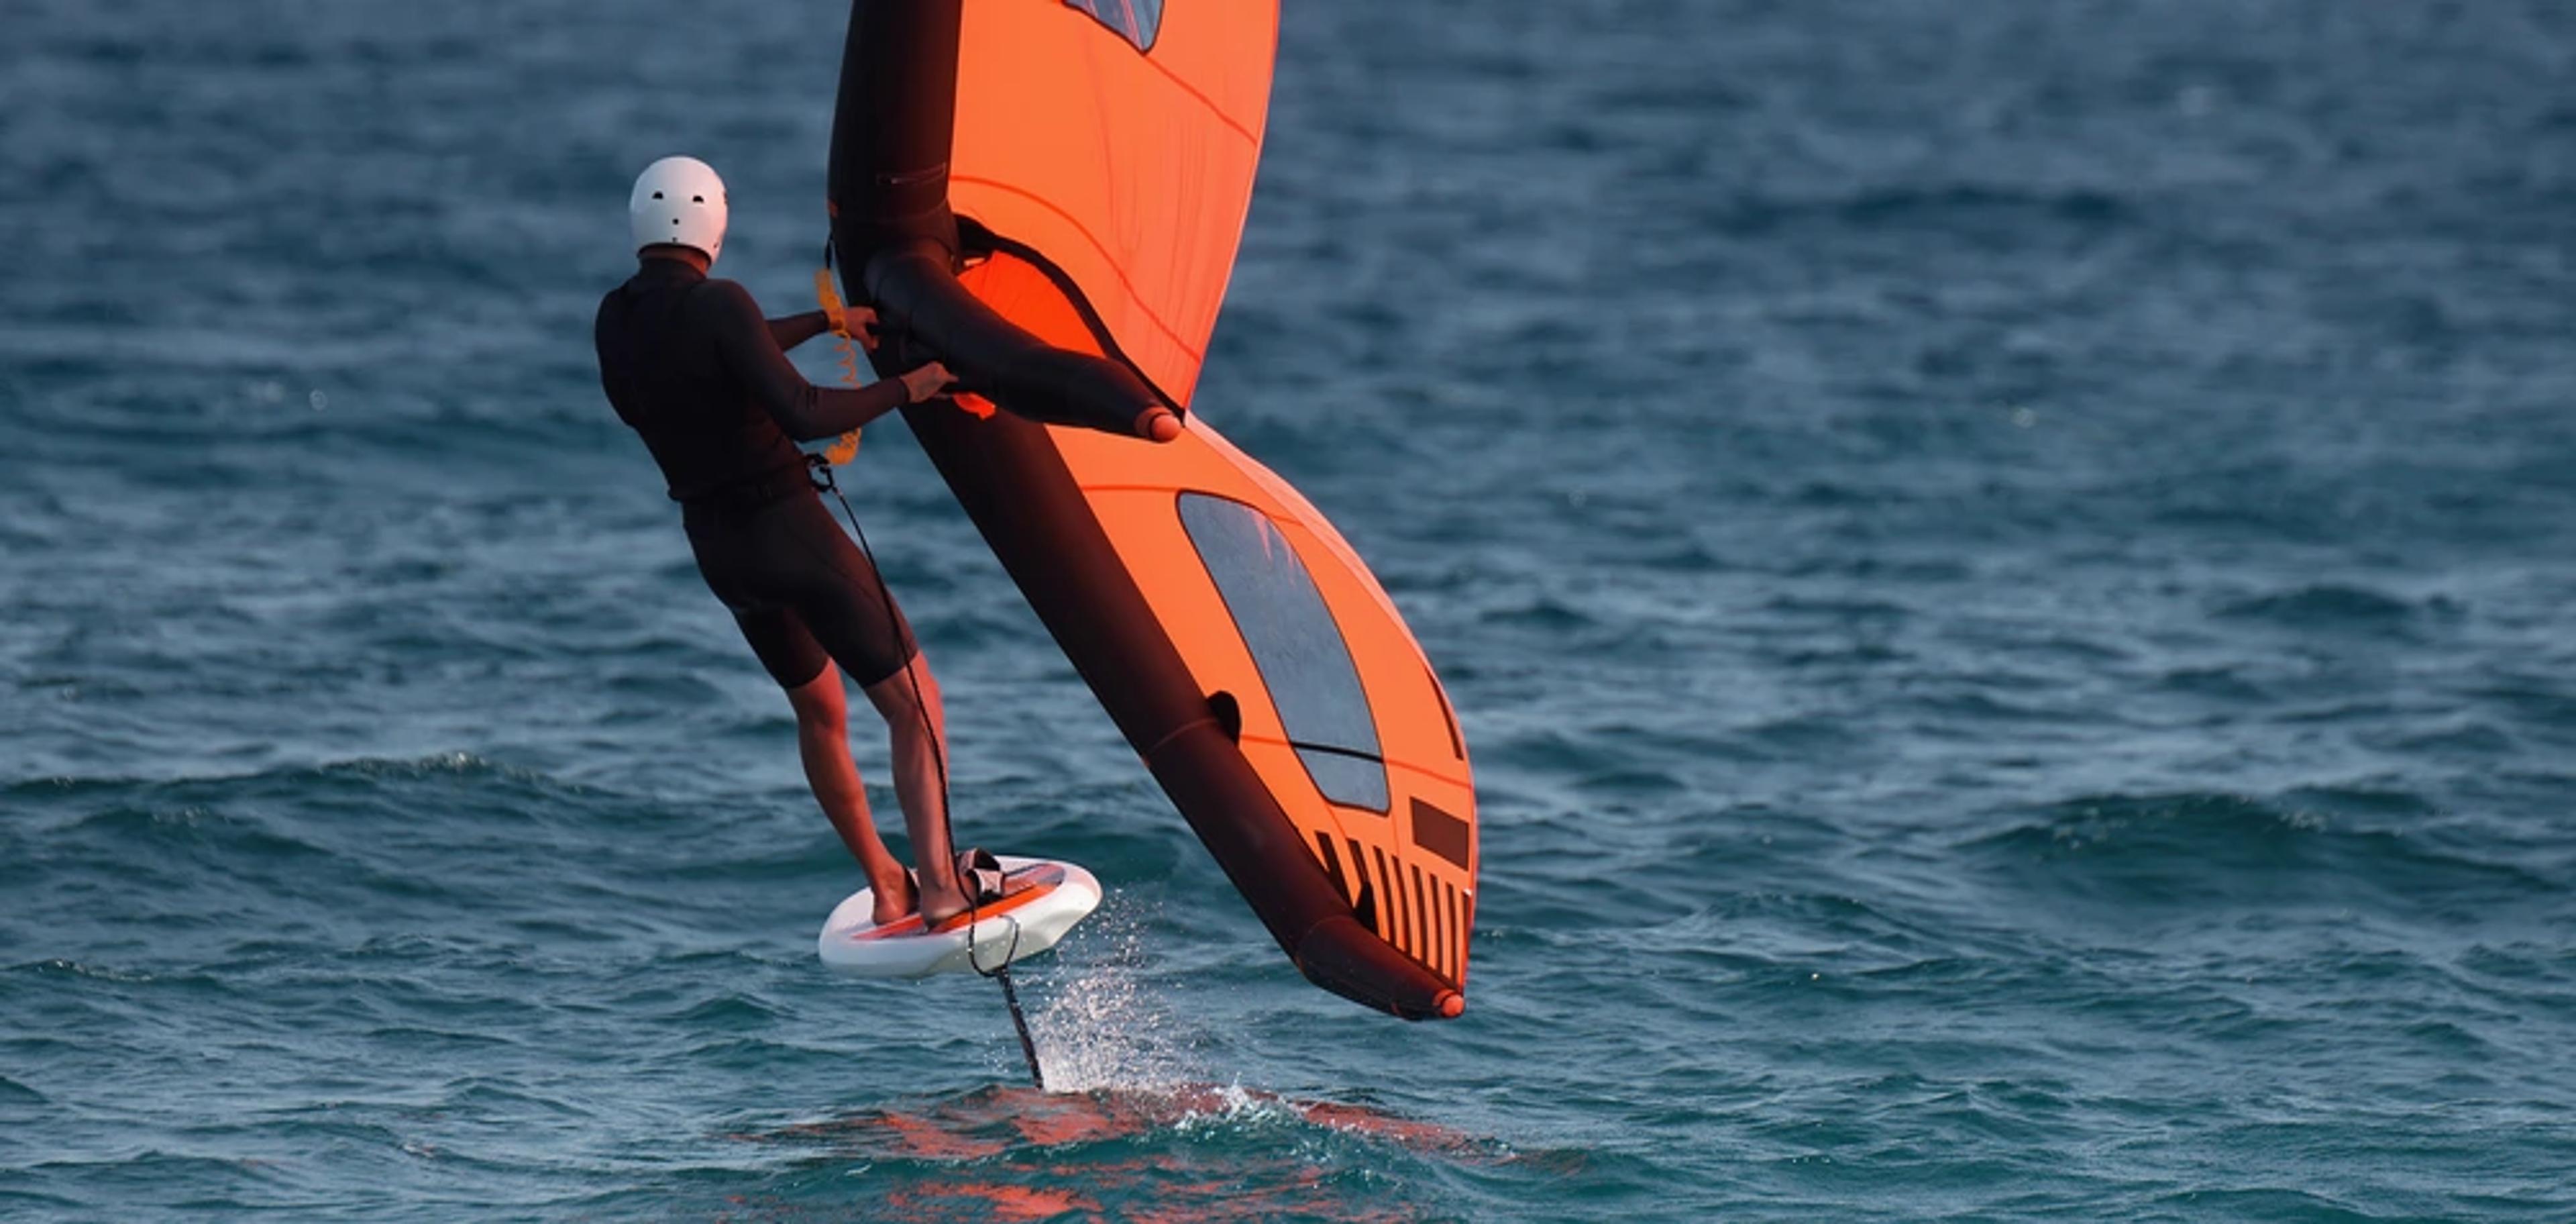 The best hydrofoil surfer